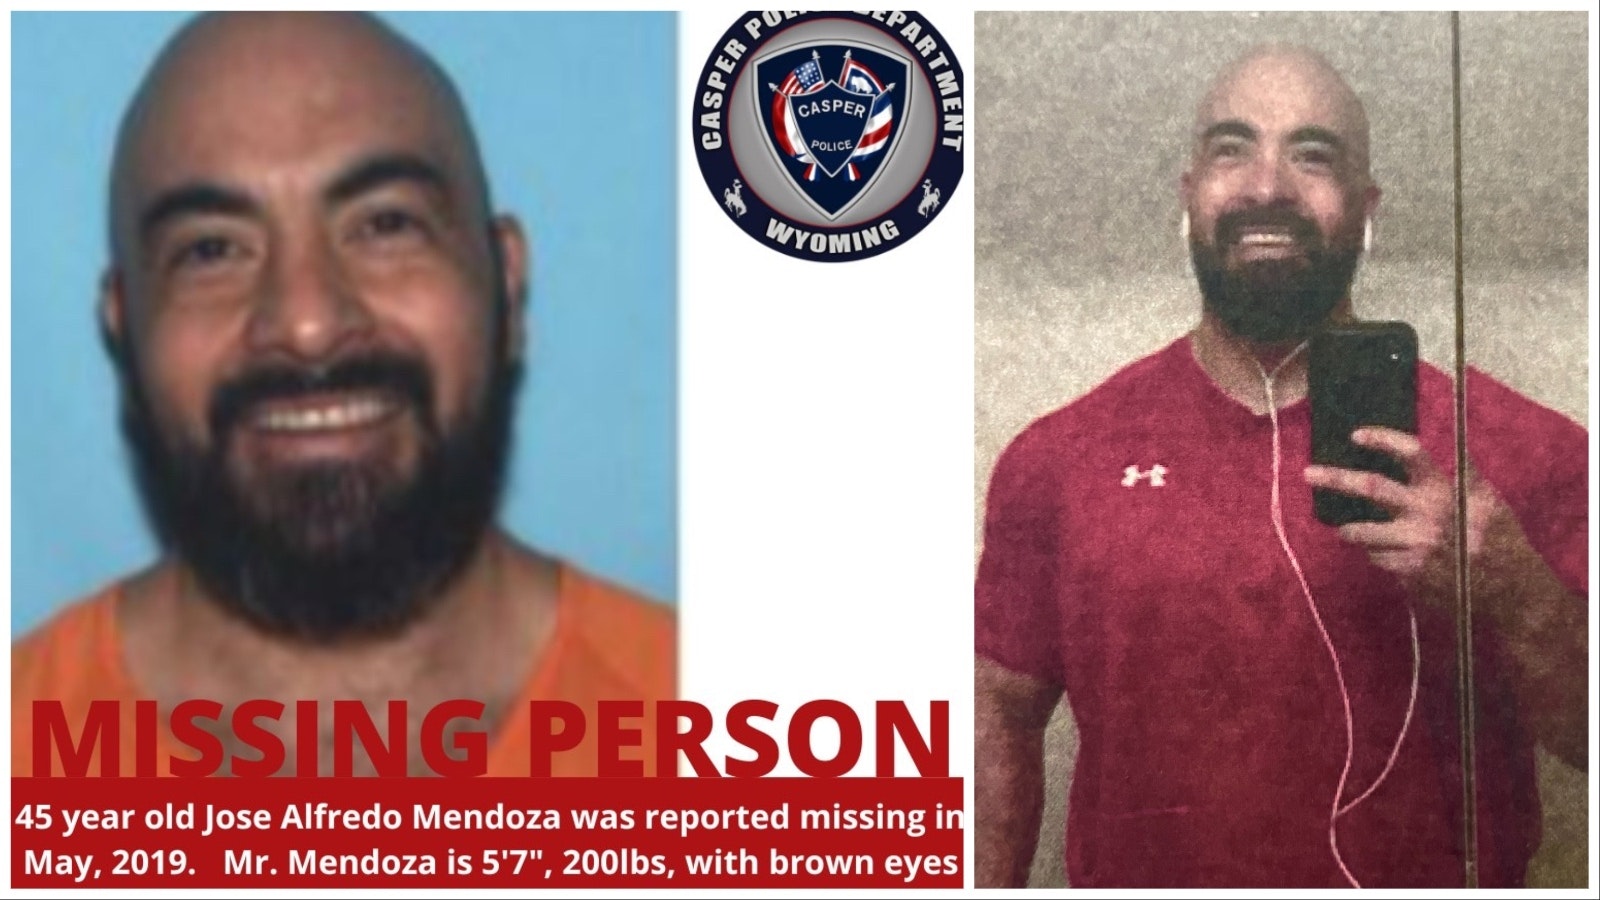 Jose Alfredo Mendoza has been missing for five years. The Casper Police Department is making a new push to find him.